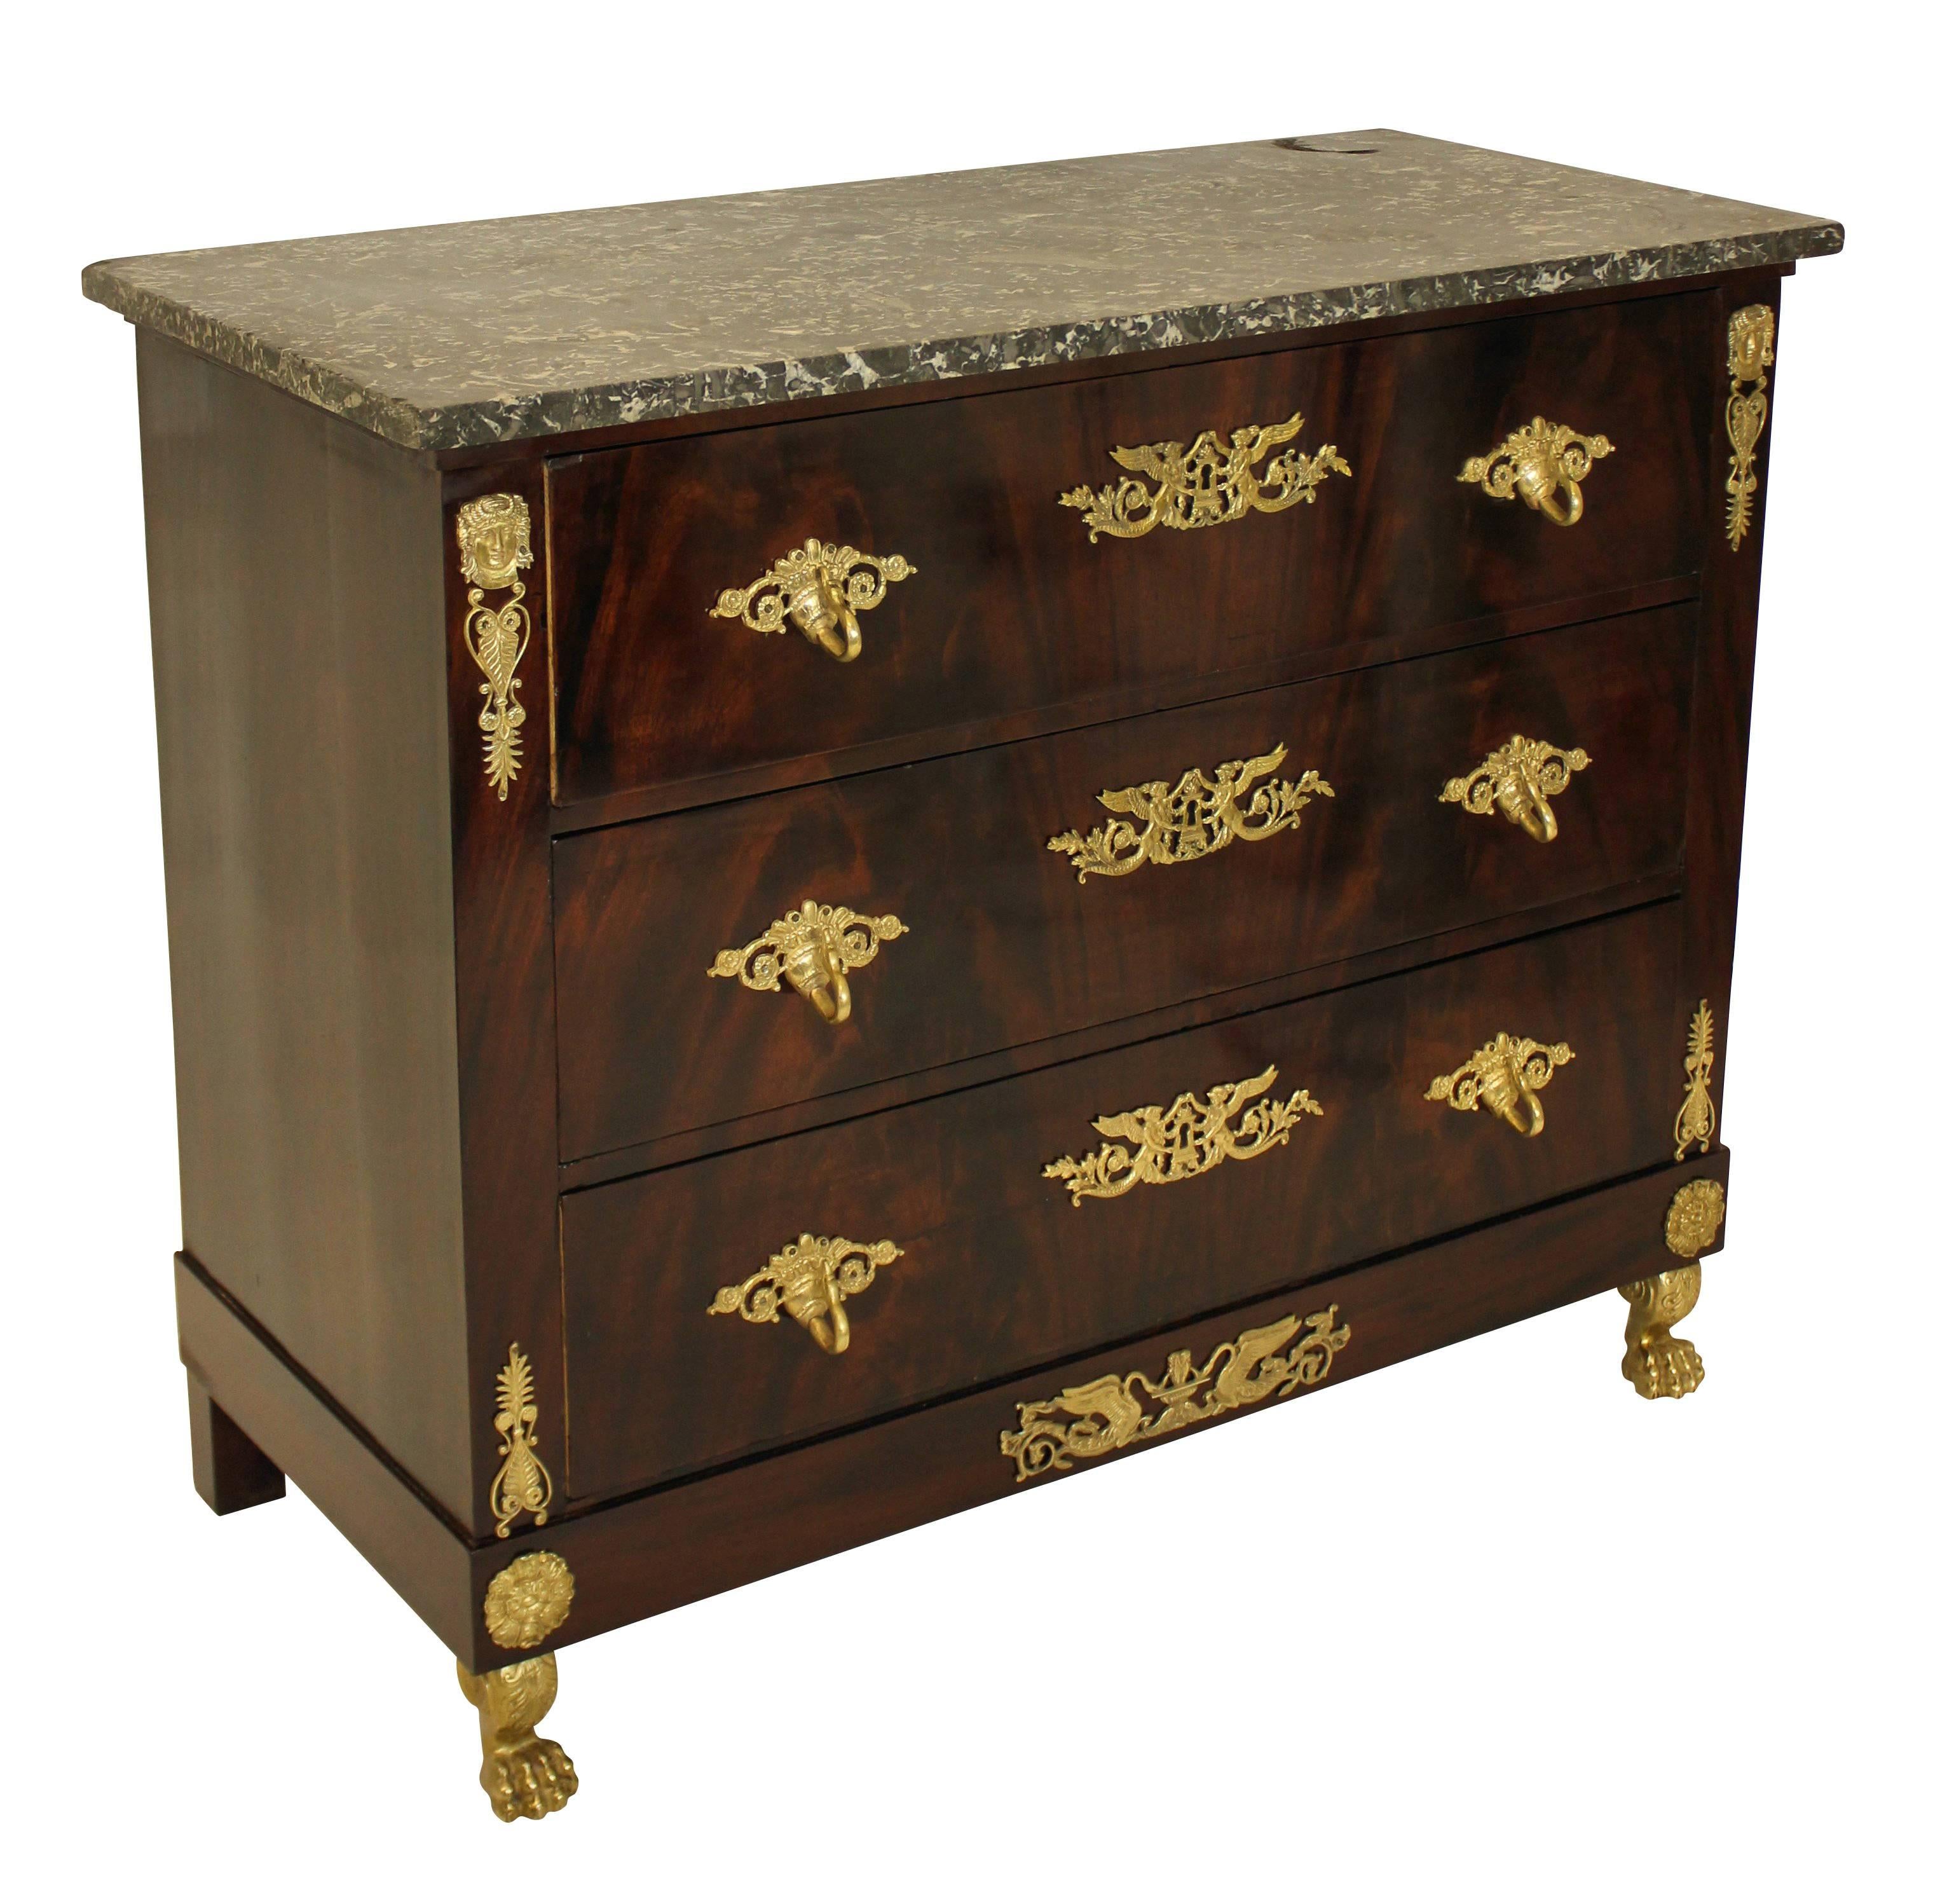 A French, first Empire commode of good quality. In flame mahogany, comprising four drawers, profusely decorated with gilt–bronze mounts with detailed gilt bronze lion paw feet and a Belgian fossil marble-top.